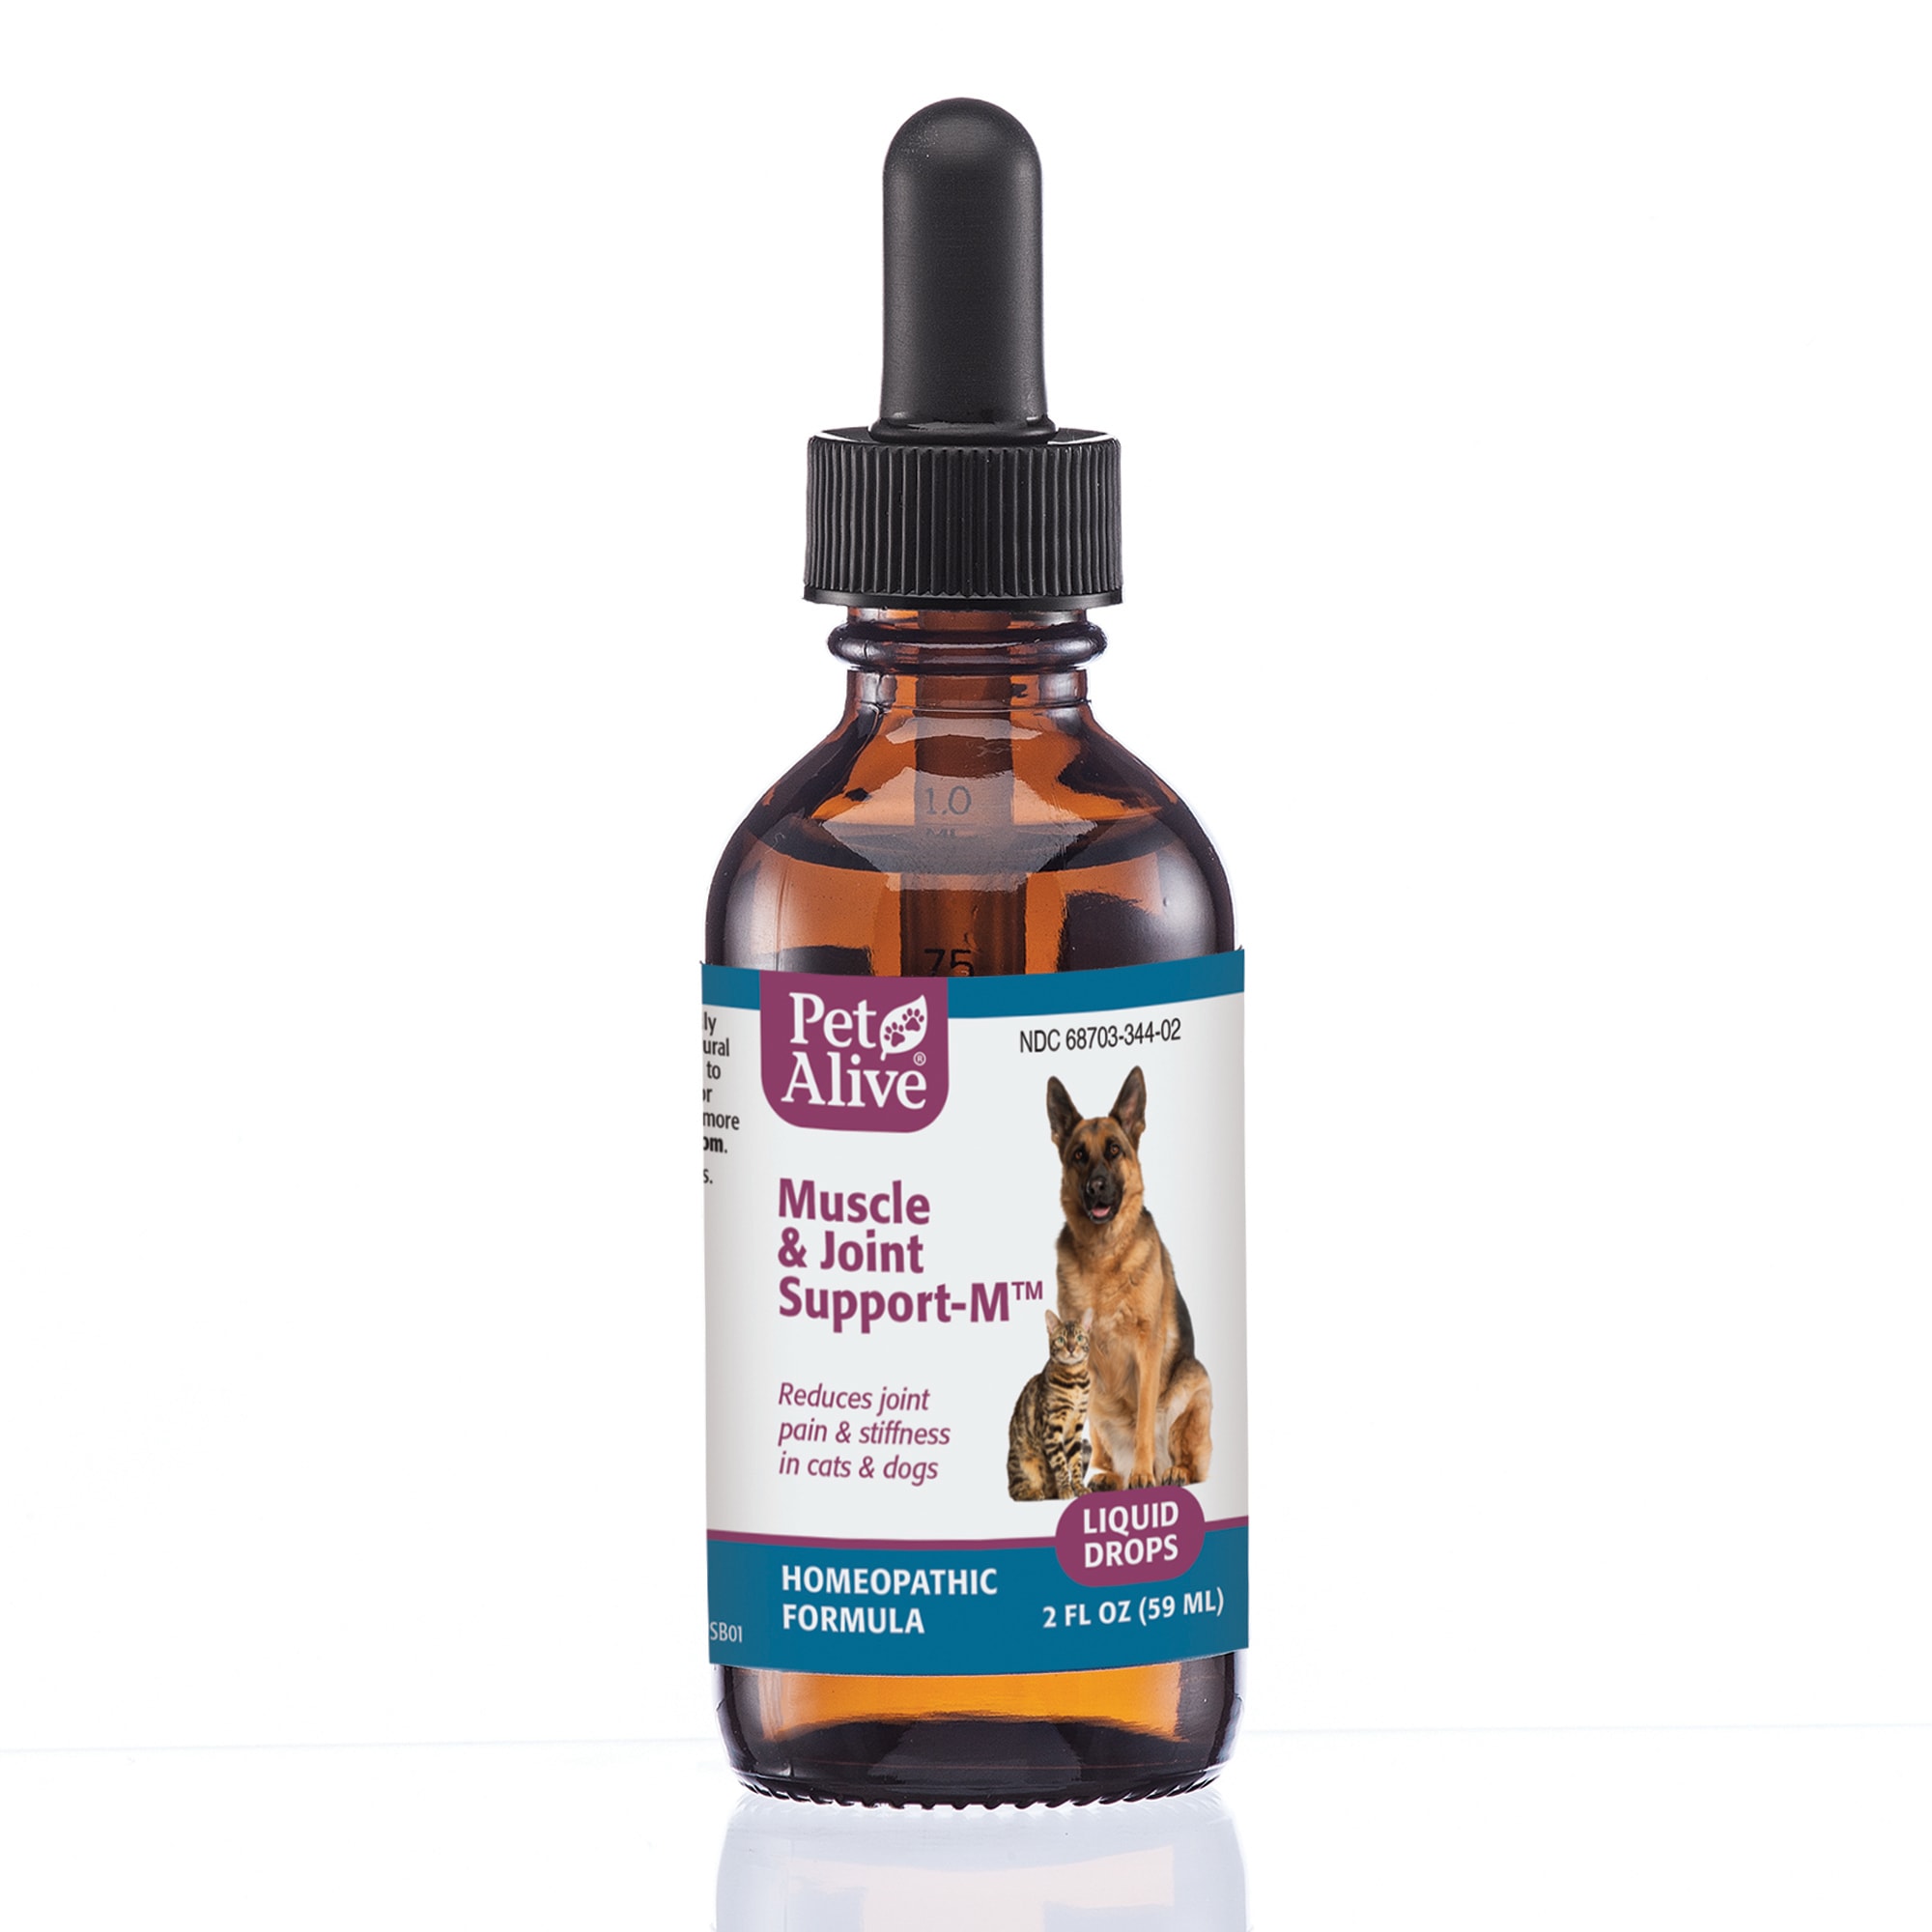 PetAlive Muscle & Joint Support-M Liquid Drops Natural Homeopathic Formula Joint Stiffness and Minor Pain for Pets